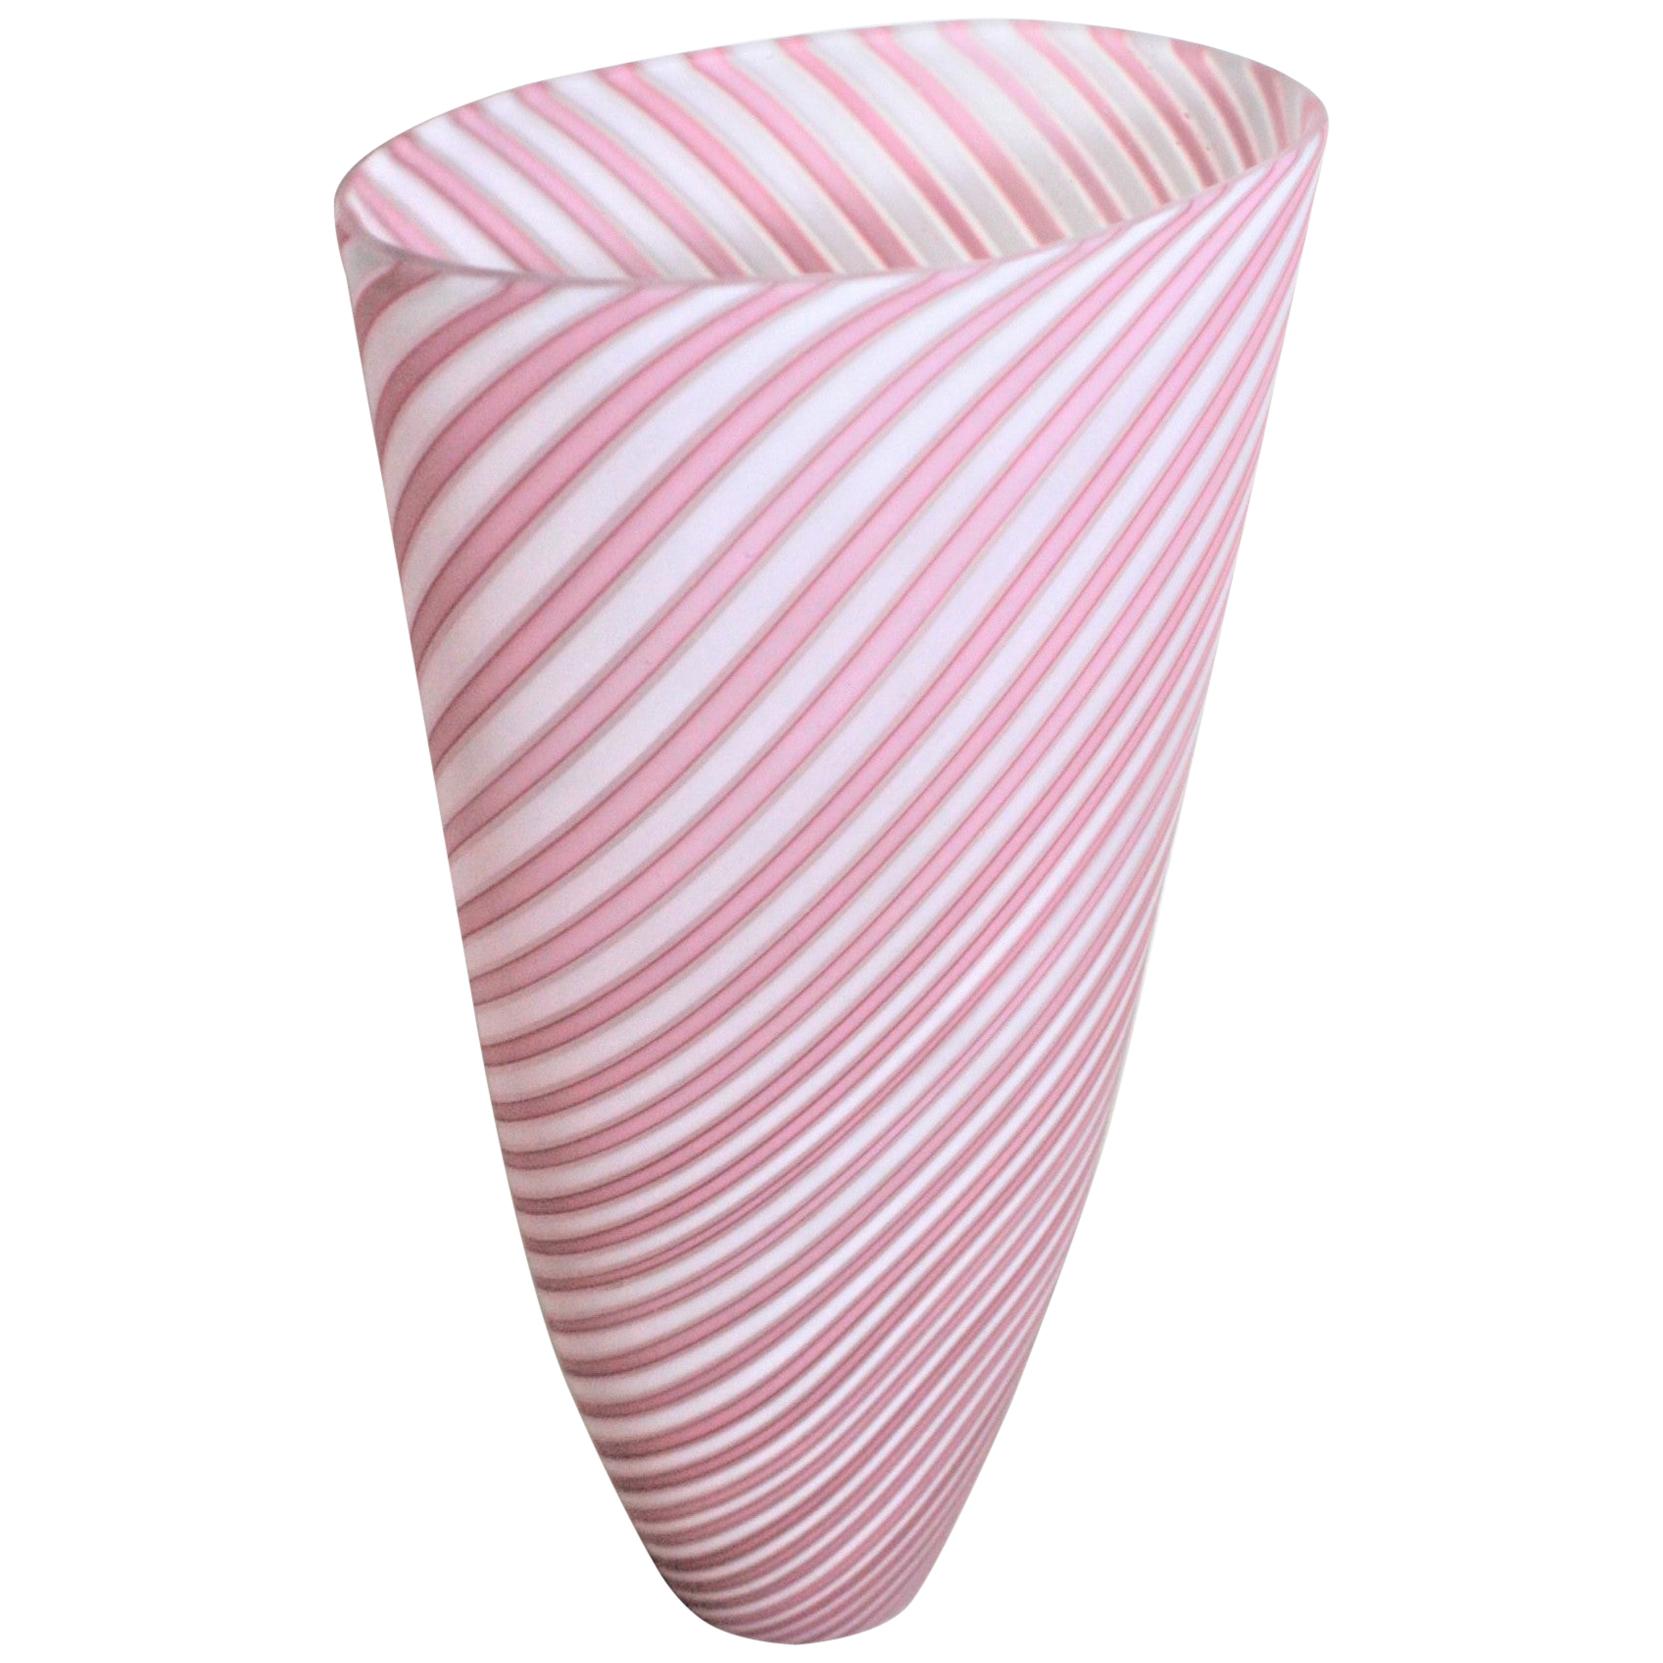 Mid-Century Modern Murano Cranberry or Pink and White Striped Art Glass Vase